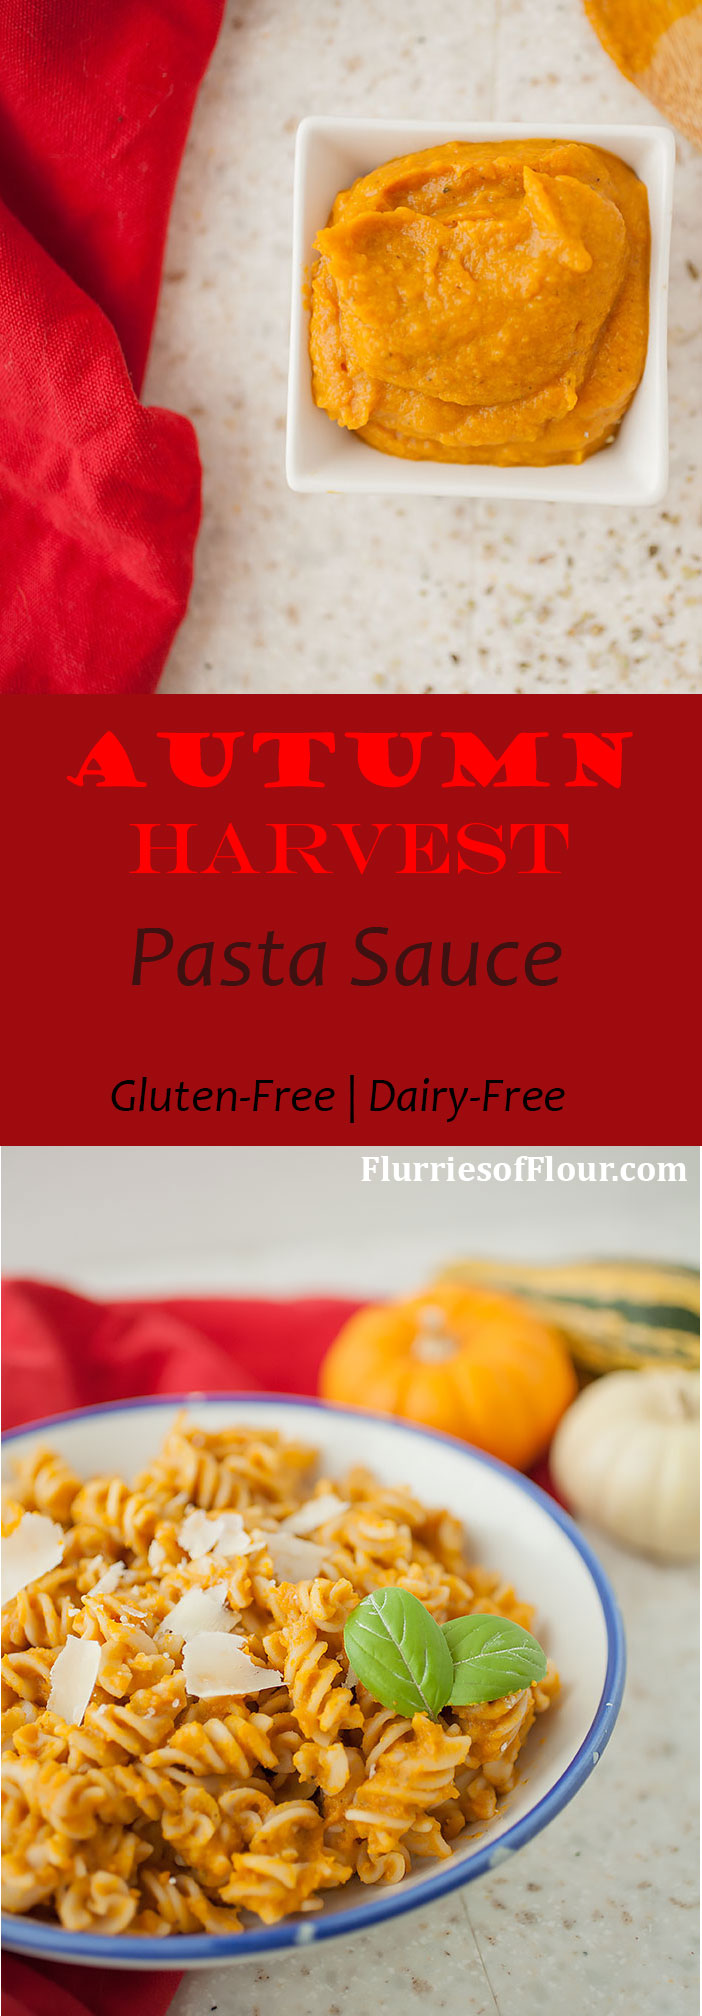 Simple, creamy, and delicious, this autumn harvest pasta sauce is gluten-free, dairy-free, and full of good-for-you pumpkin and squash with added creaminess from coconut milk! It also makes a beautiful base for further flavors and additions, and stores perfectly in the freezer!